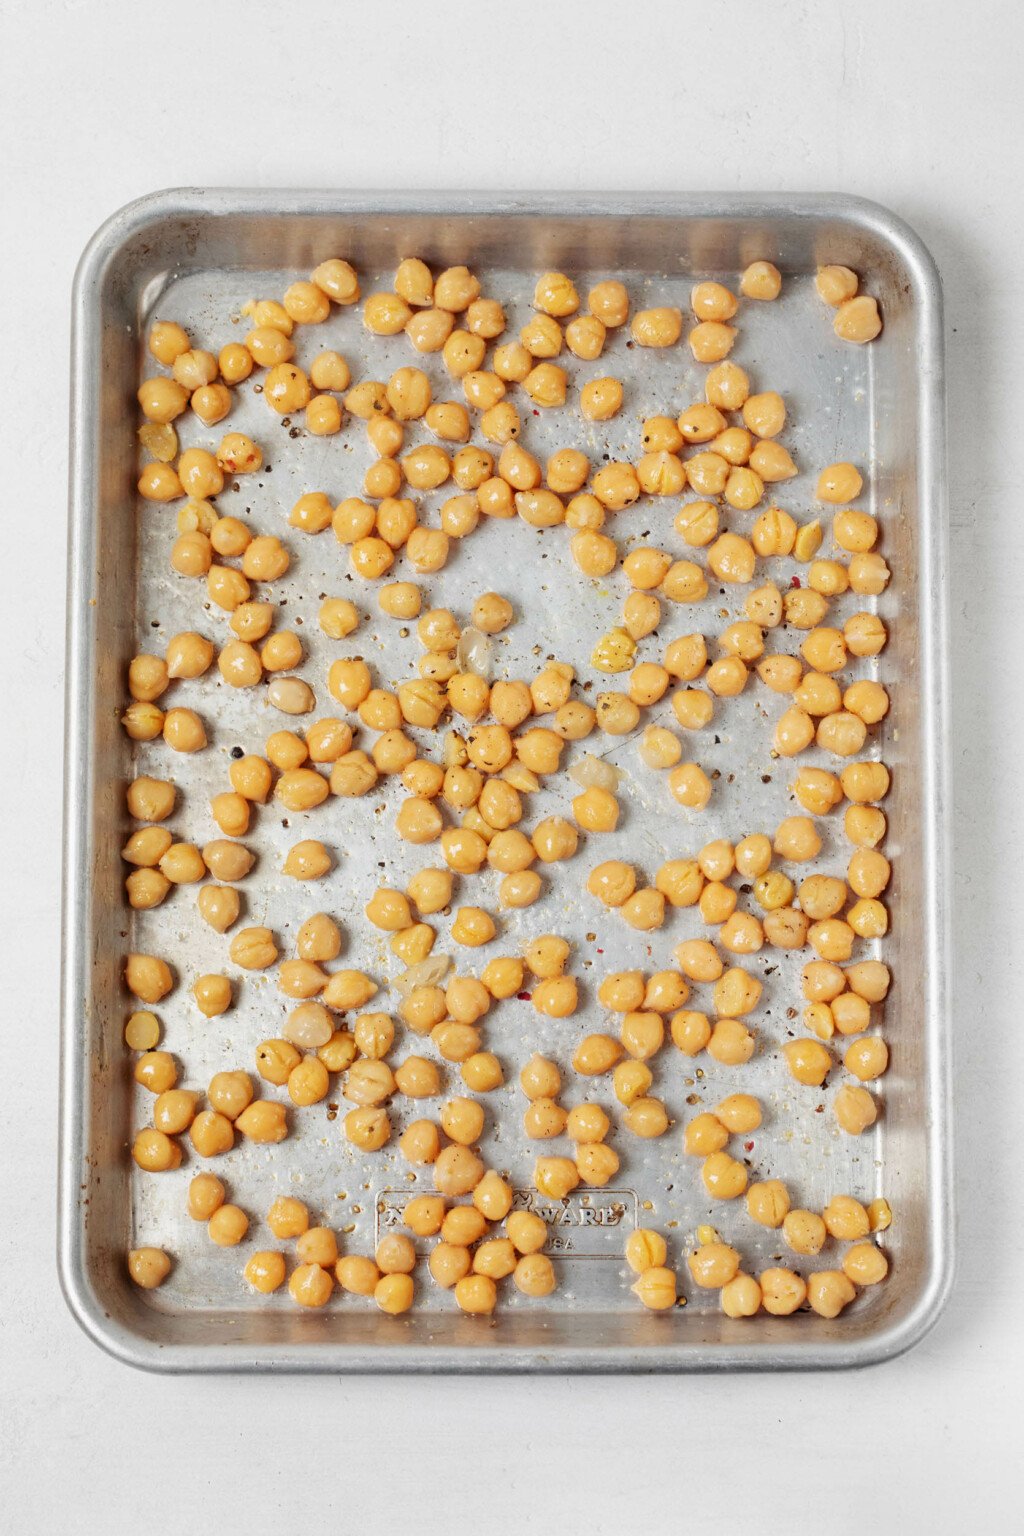 Chickpeas, which have been seasoned with oil, salt, and pepper, are on a metal baking sheet.